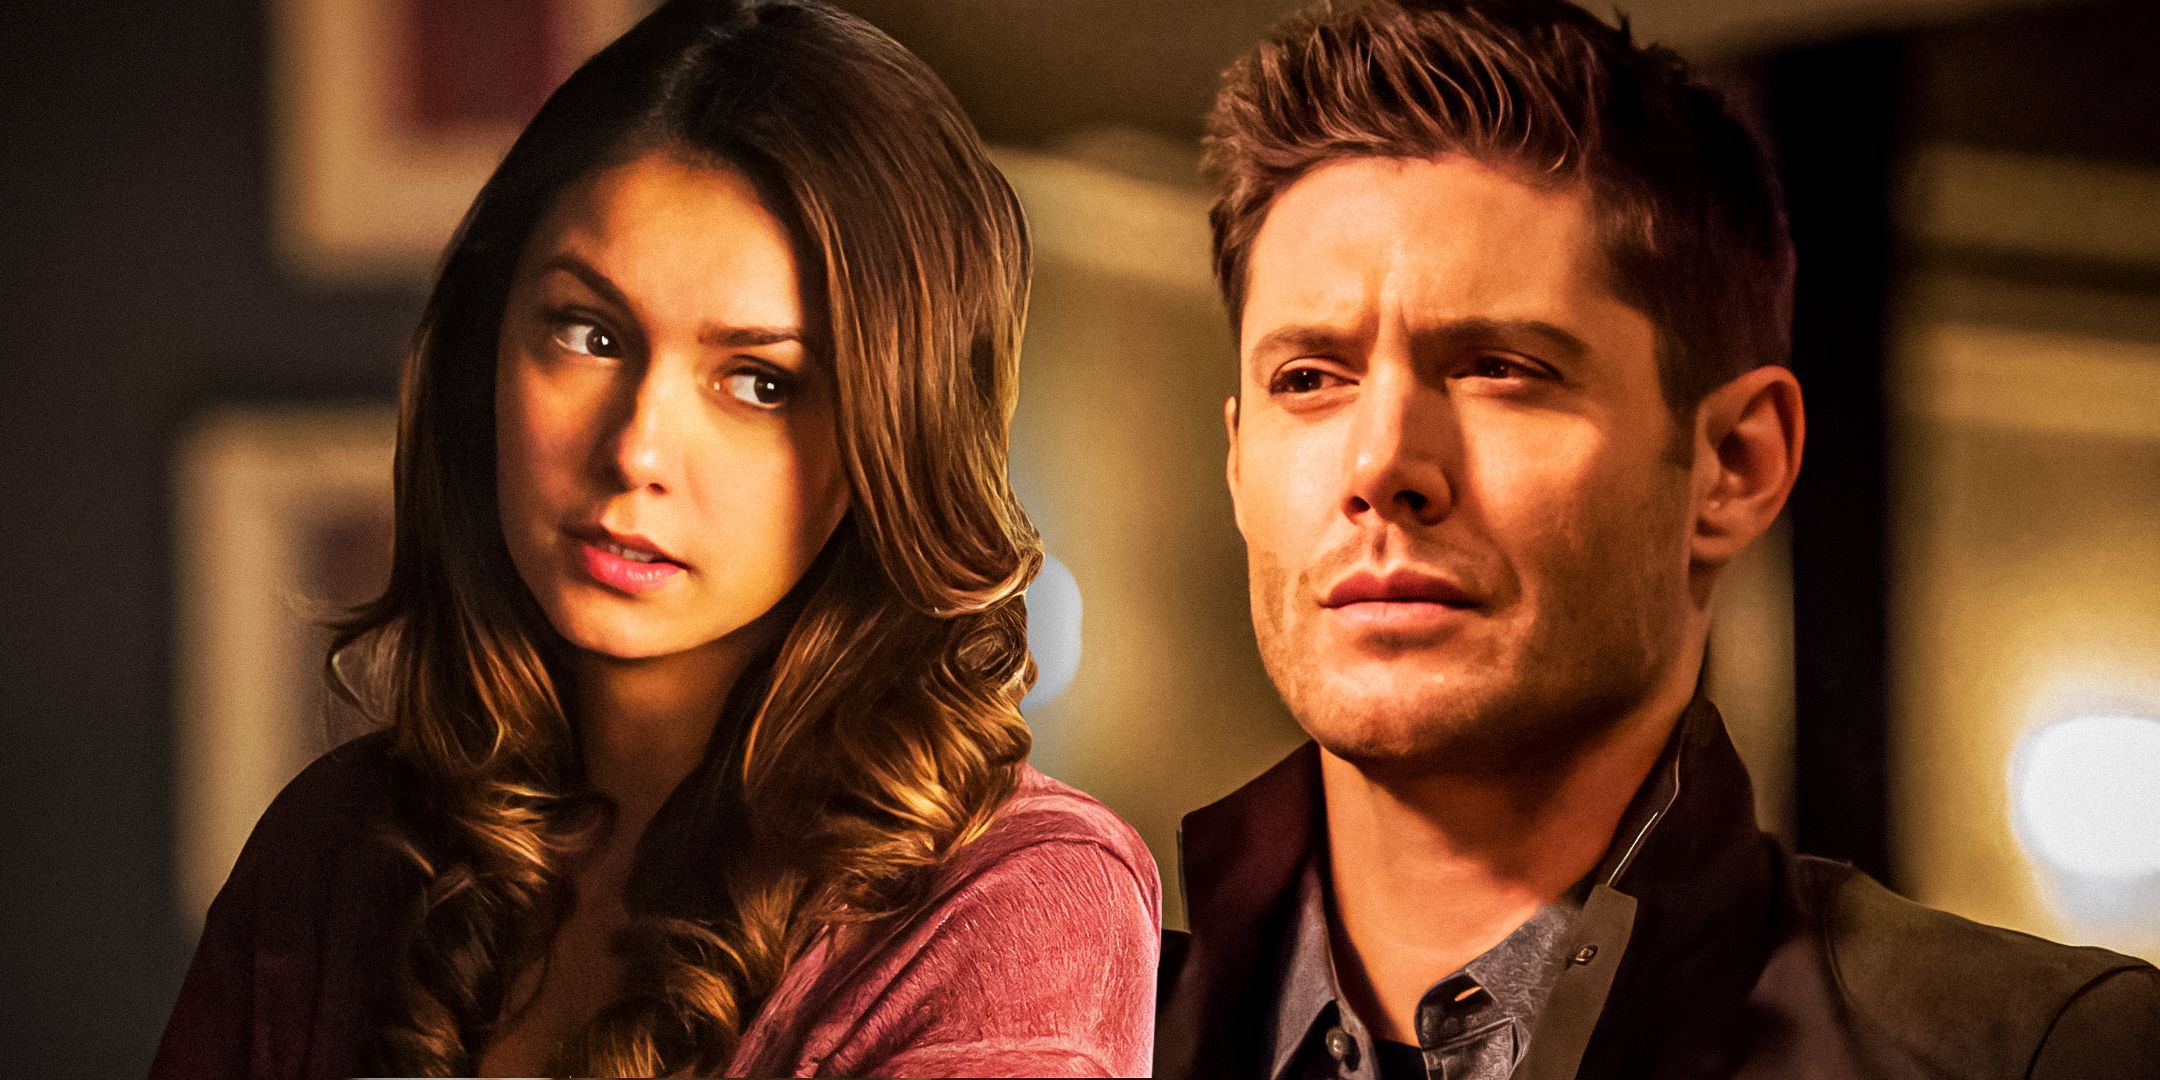 (Nina-Dobrev-as-Elena-Gilbert)-from-The-Vampire-Diaries-and-(Jensen-Ackles-as-Dean-Winchester)-from-Supernatural